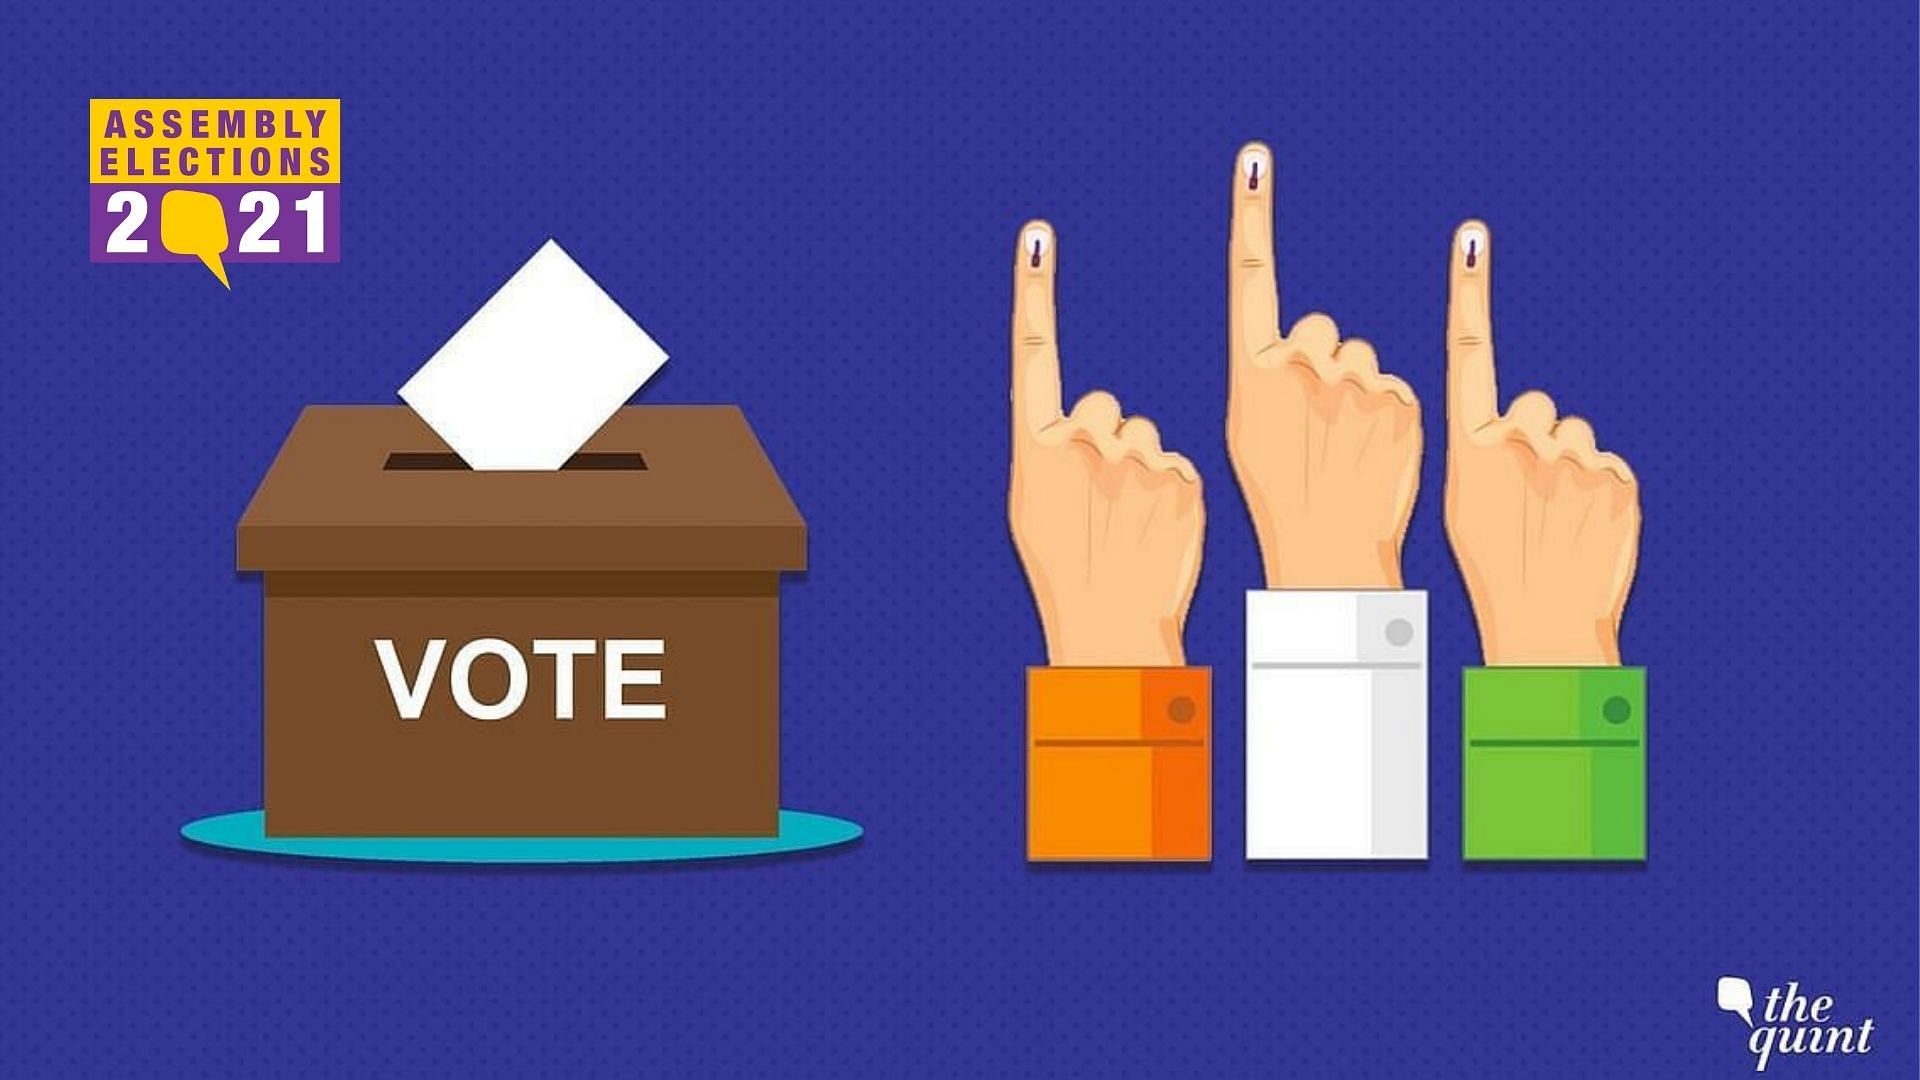 The first phase of polling in <a href="https://www.thequint.com/west-bengal-elections/west-bengal-assembly-election-2021-latest-news-live-updates">West Bengal</a> and <a href="https://www.thequint.com/assam-elections/assam-assembly-election-2021-live-updates">Assam</a> Assembly elections ended on Saturday, 27 March, with voter turnout recorded as 79.79 percent and 72.14 percent respectively.